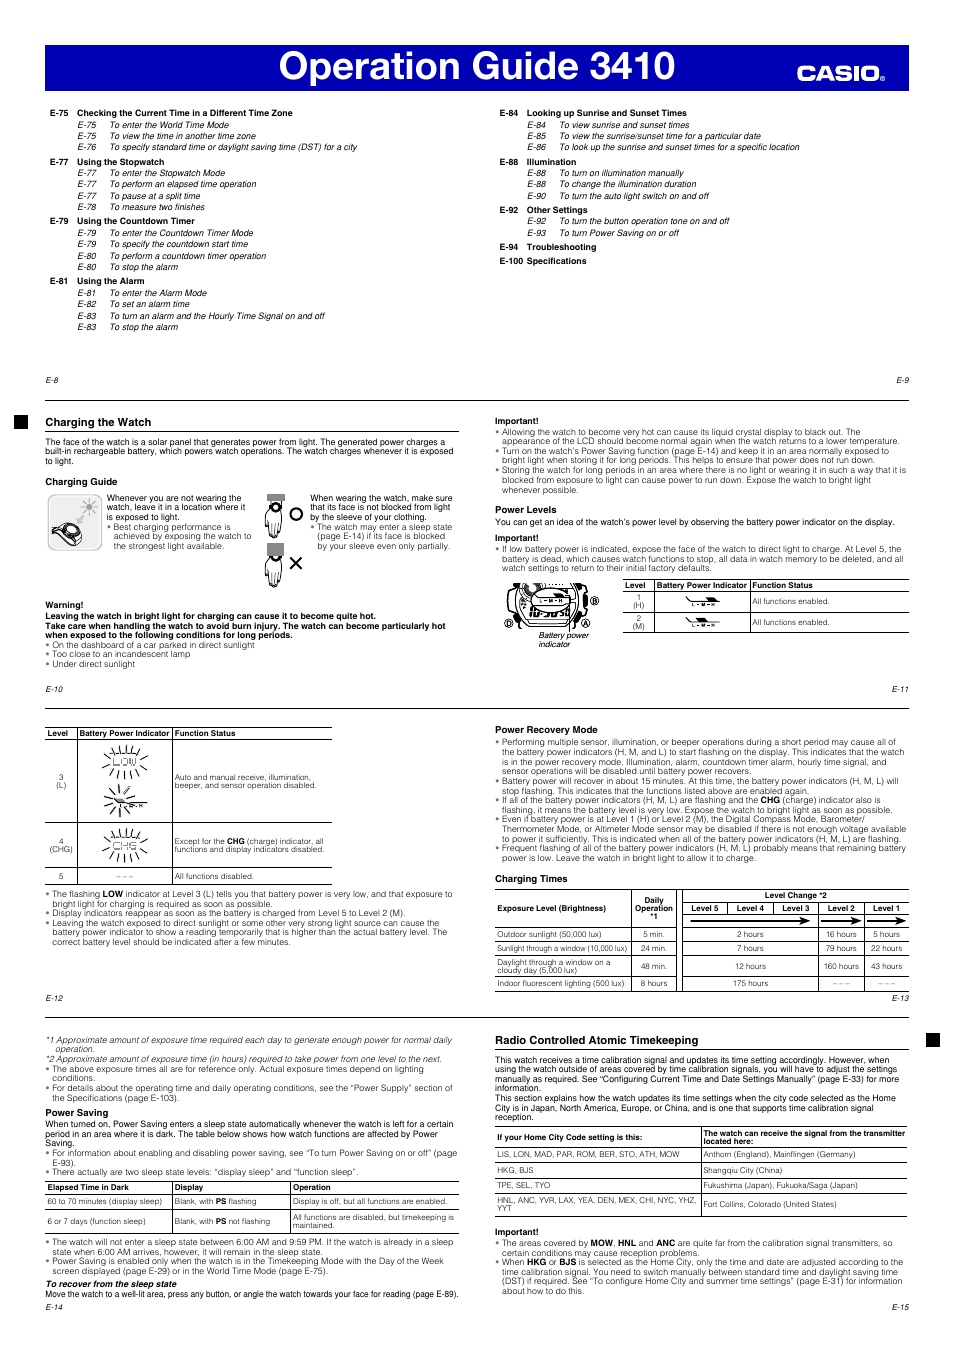 Operation guide 3410 | G-Shock 3410 User Manual | Page 2 / 14 ...